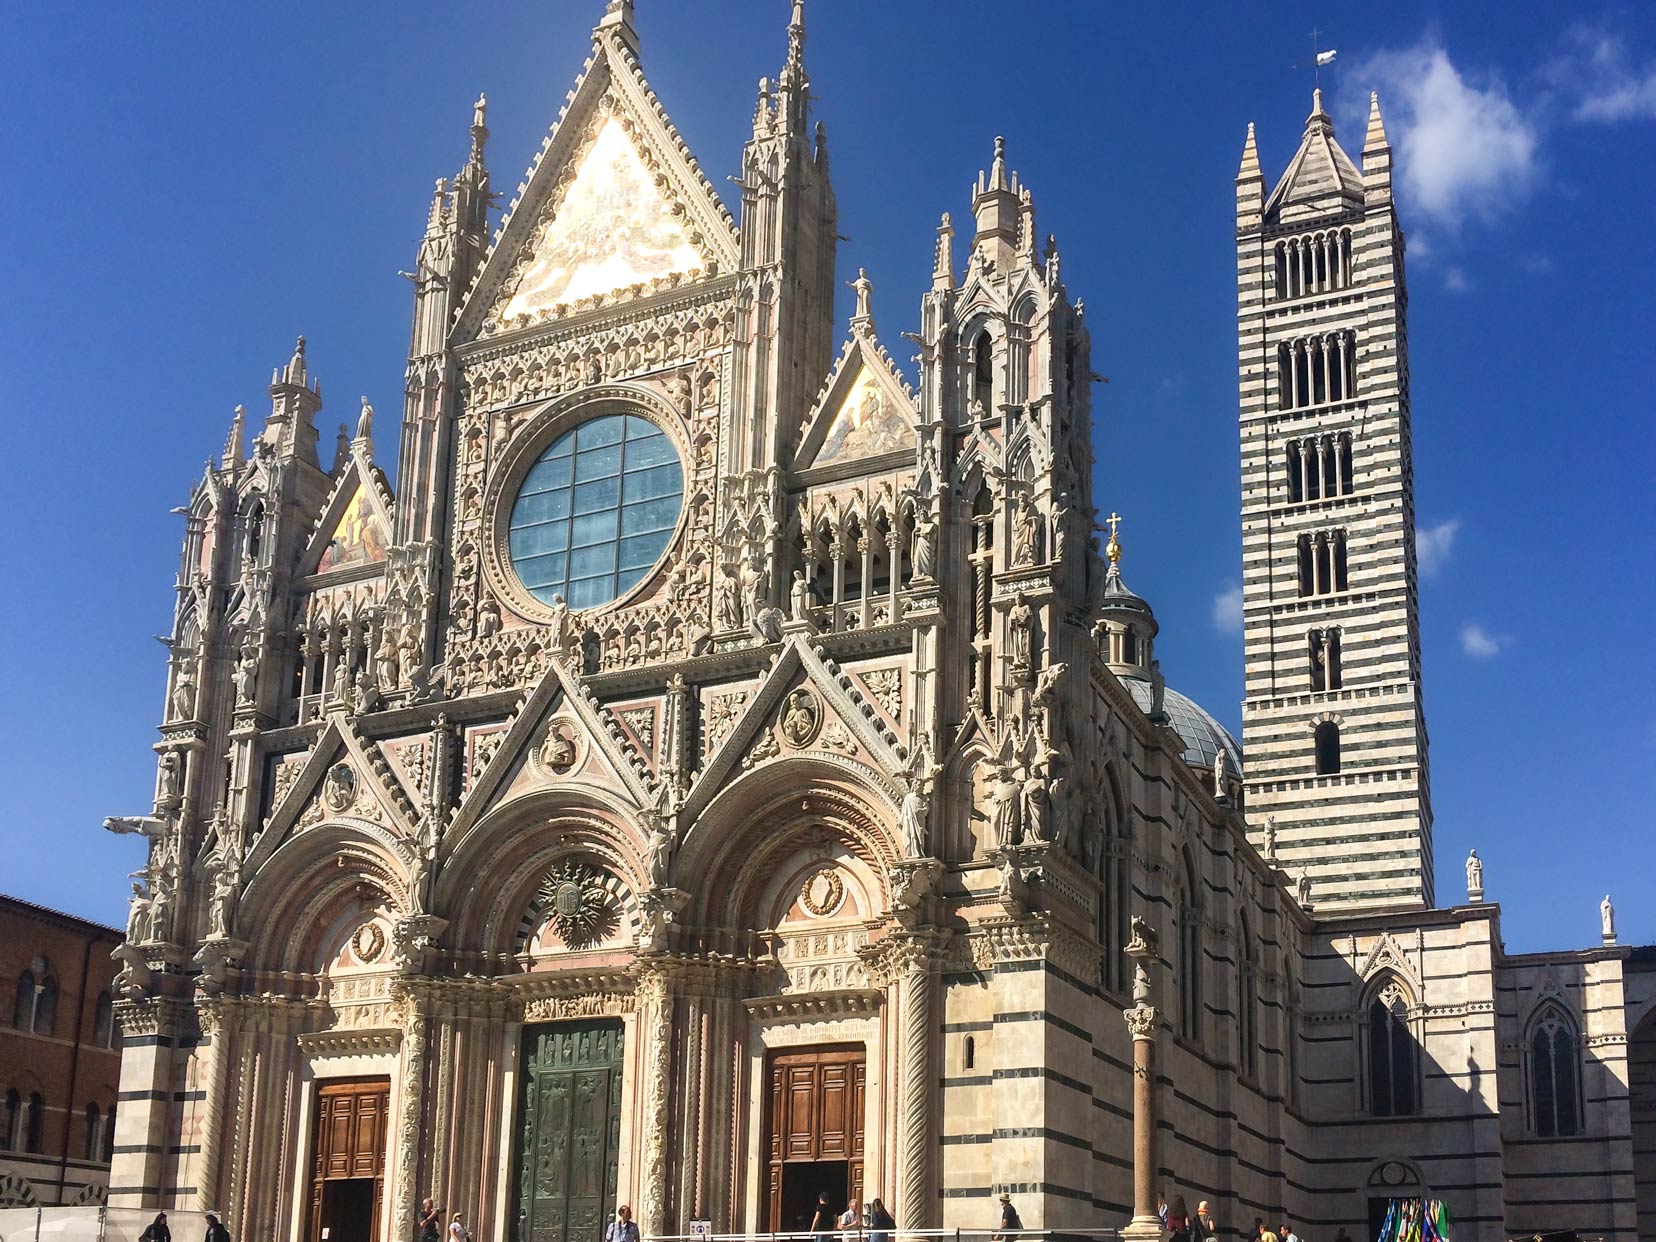 Siena cathedral